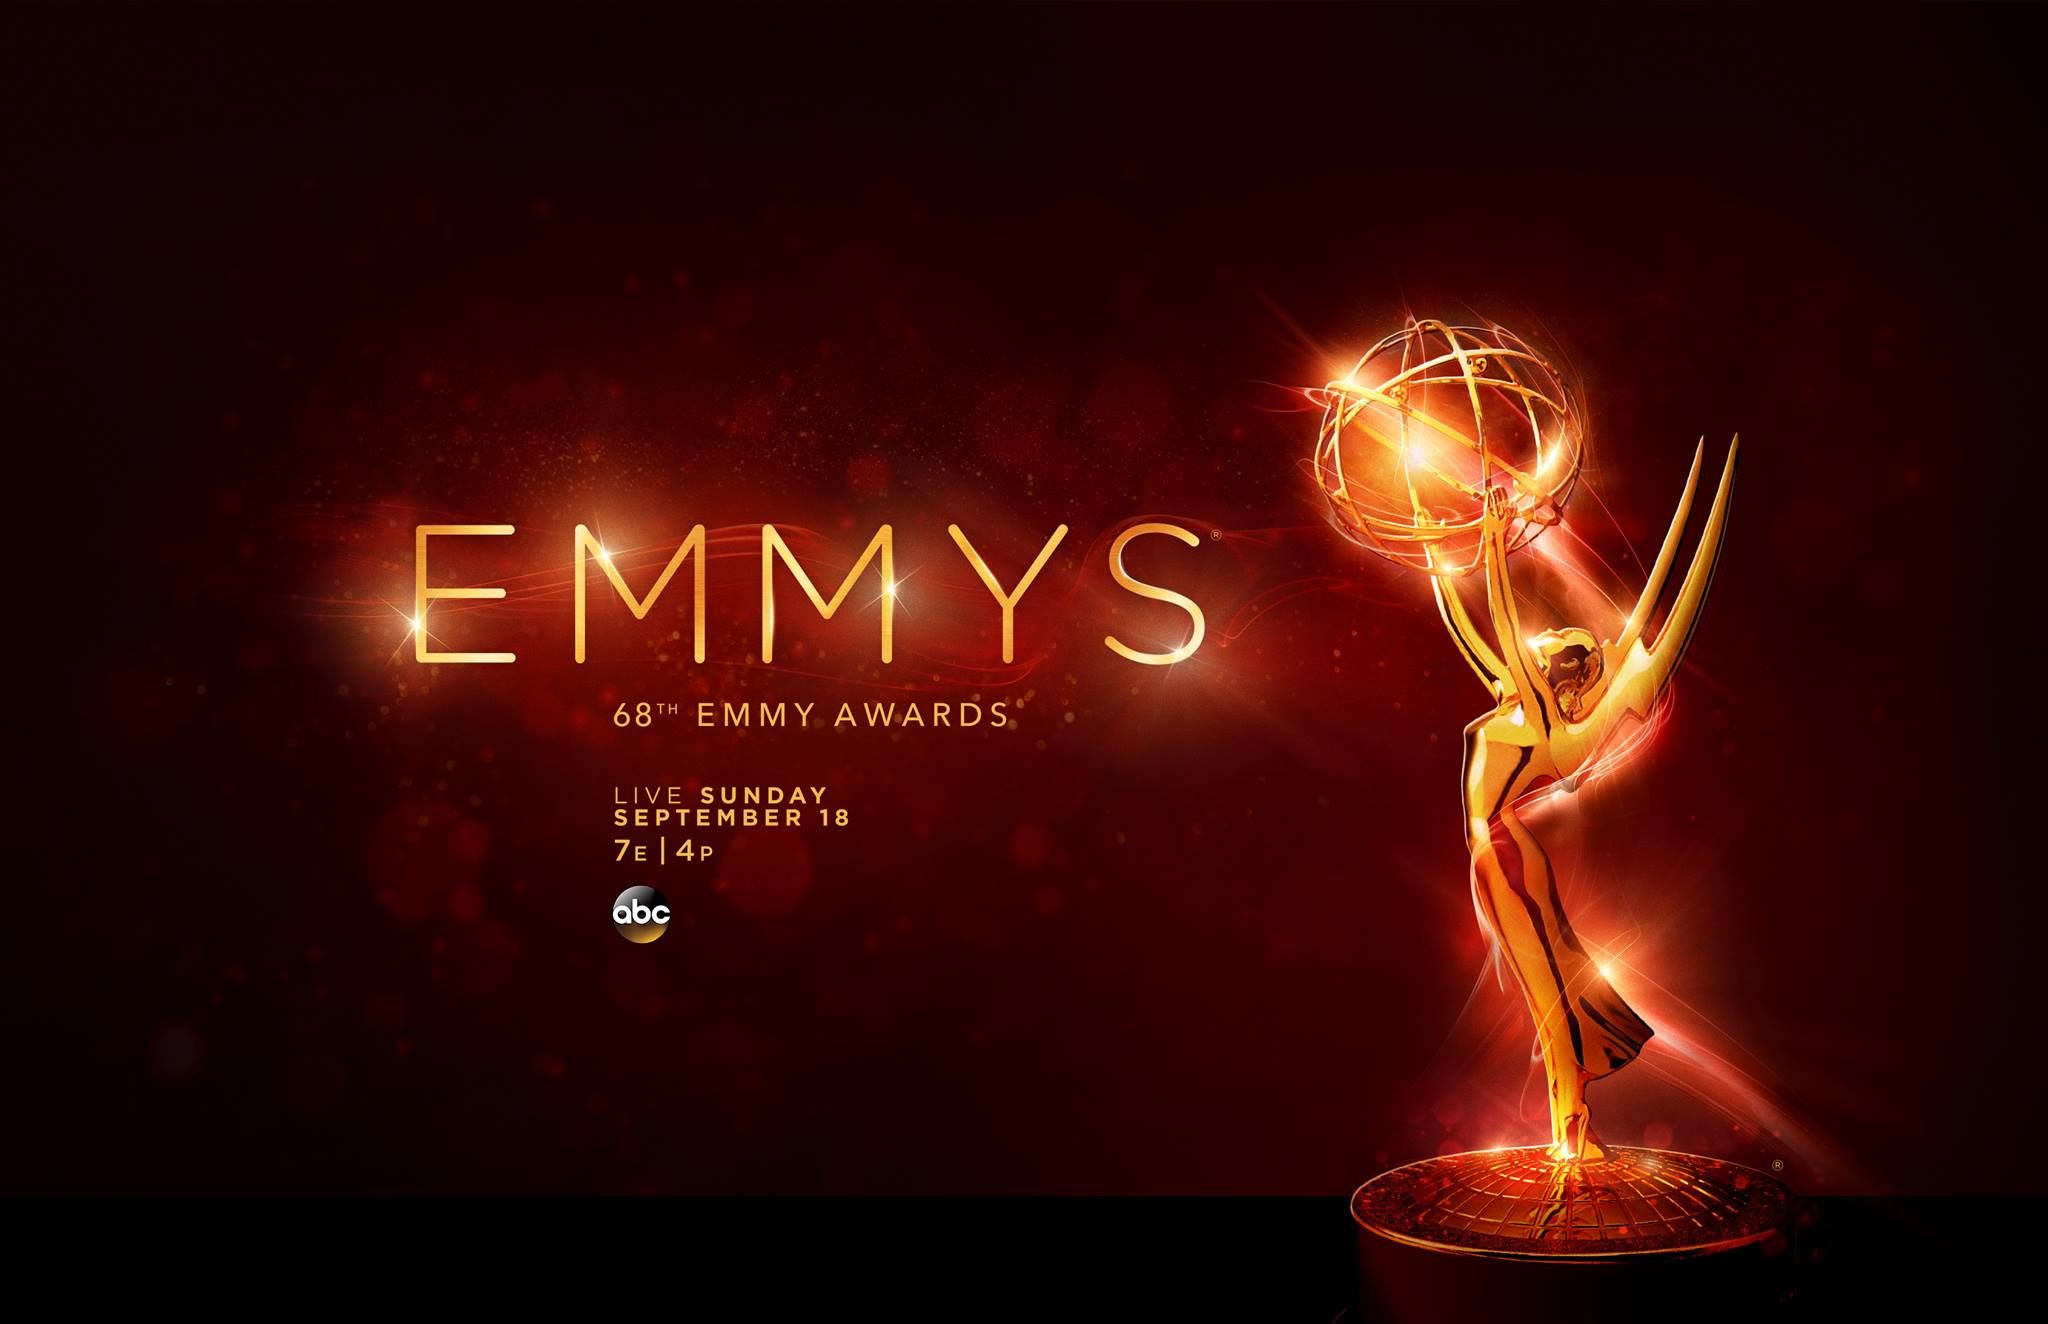 Emmy Awards History 4 Fun Facts And Trivia About The Award Show